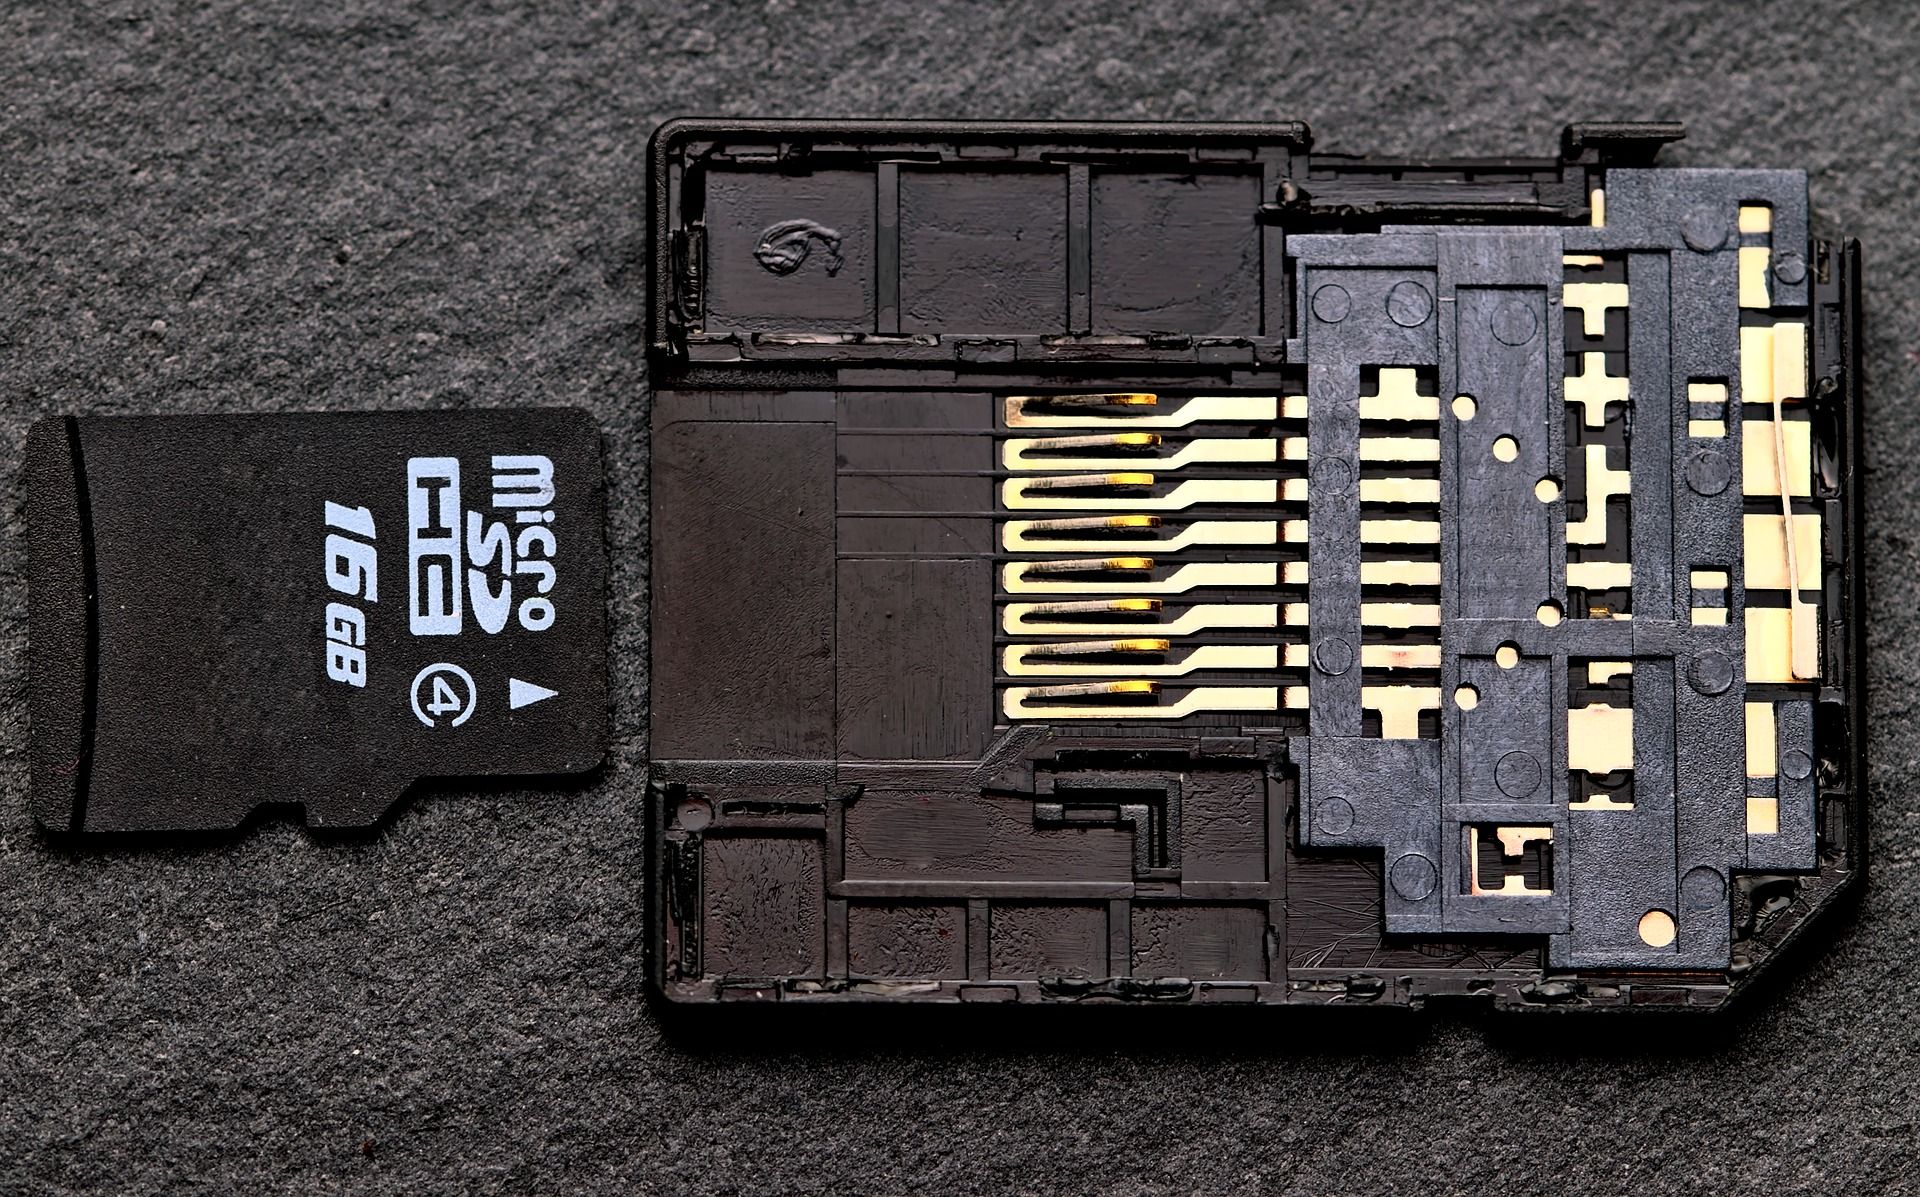 MicroSD card and adapter